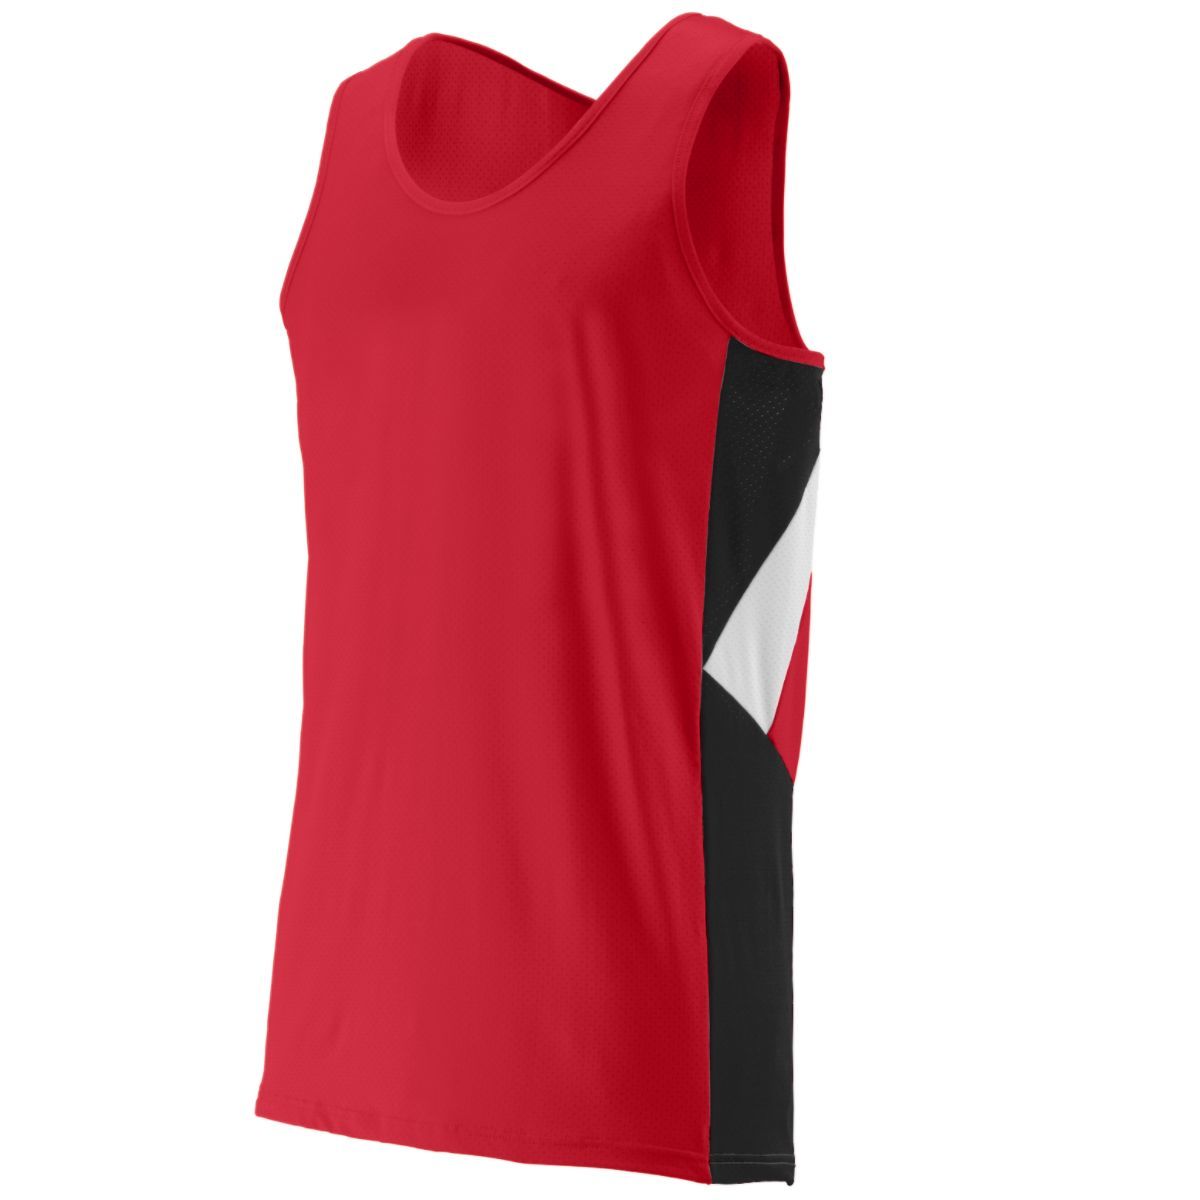 Augusta Sportswear Sprint Jersey in Red/Black/White  -Part of the Adult, Adult-Jersey, Augusta-Products, Track-Field, Shirts product lines at KanaleyCreations.com